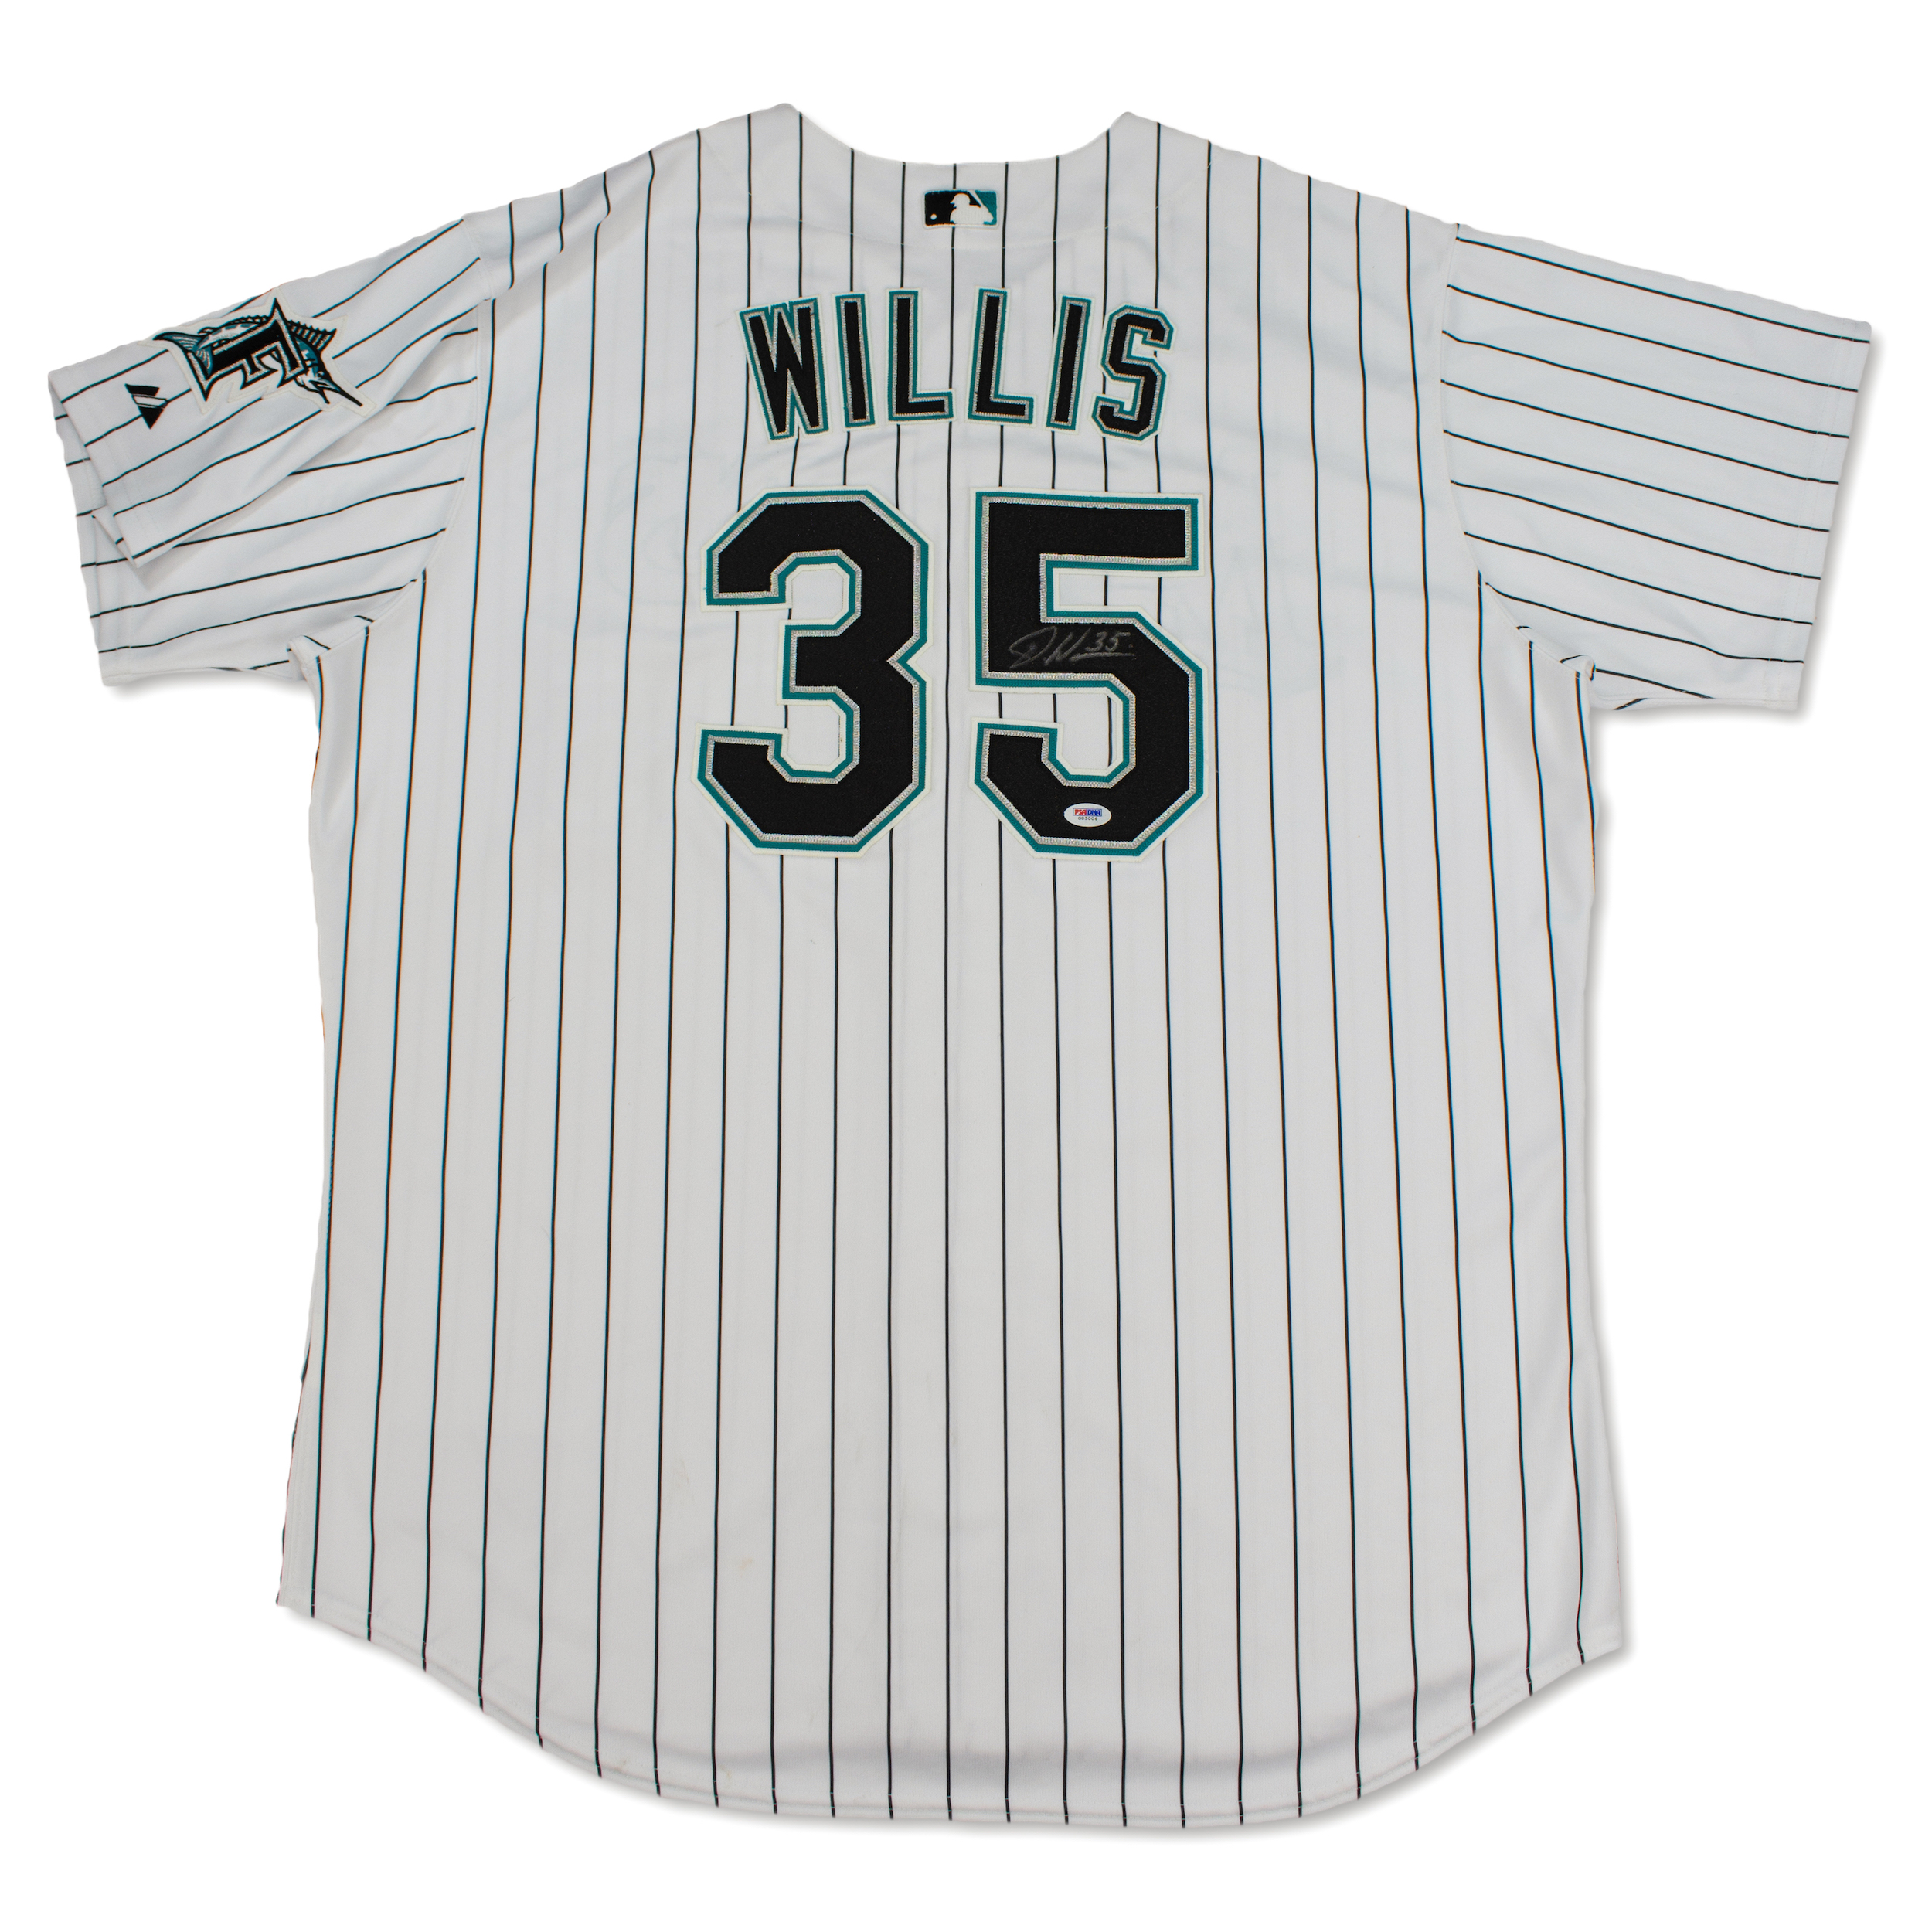 Dontrelle Willis Signed Jersey Marlins - COA 100% Authentic Team